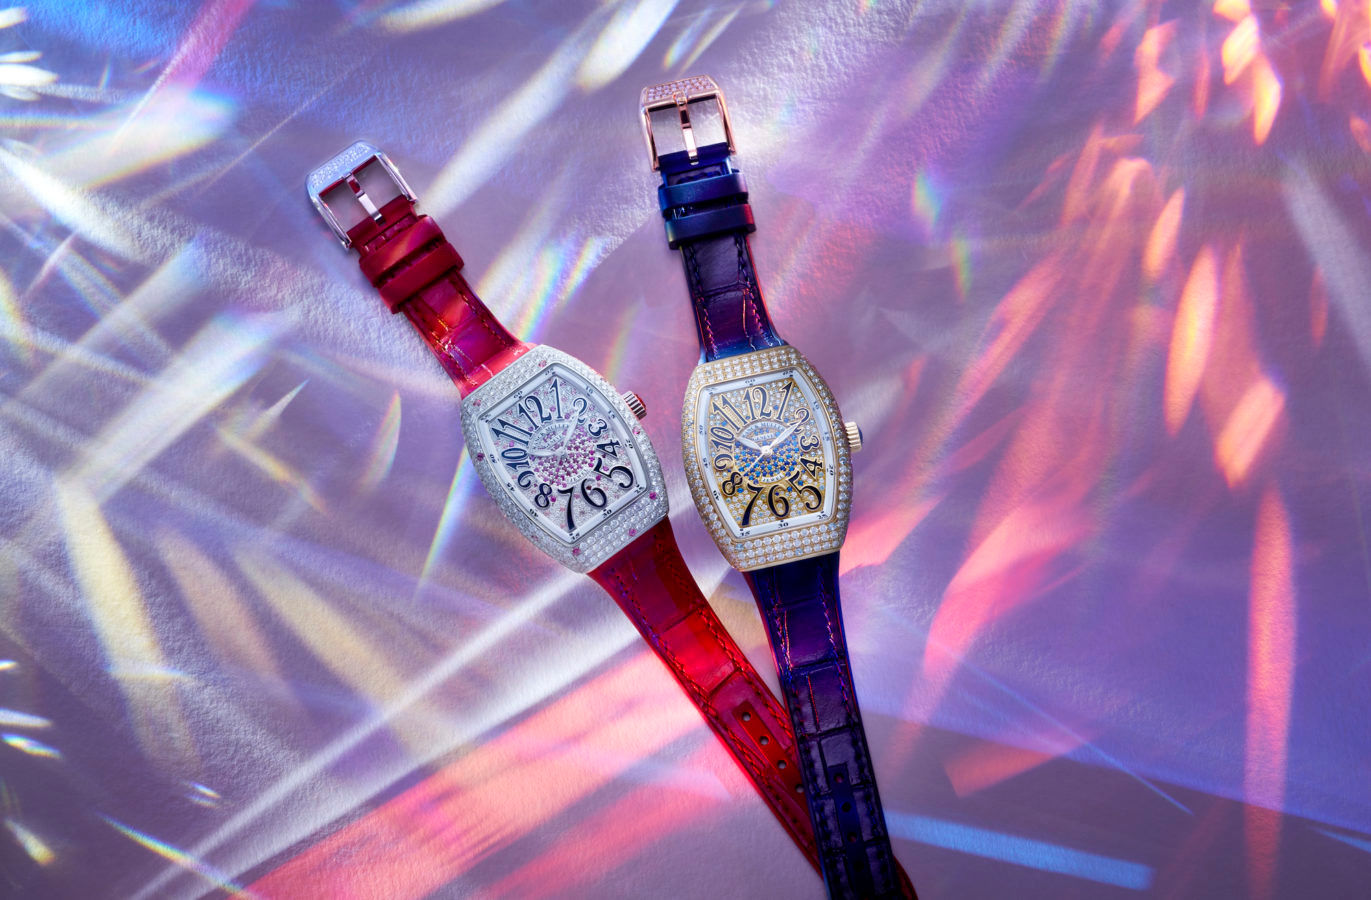 Indulge your leading lady this Mother’s Day with these new watches